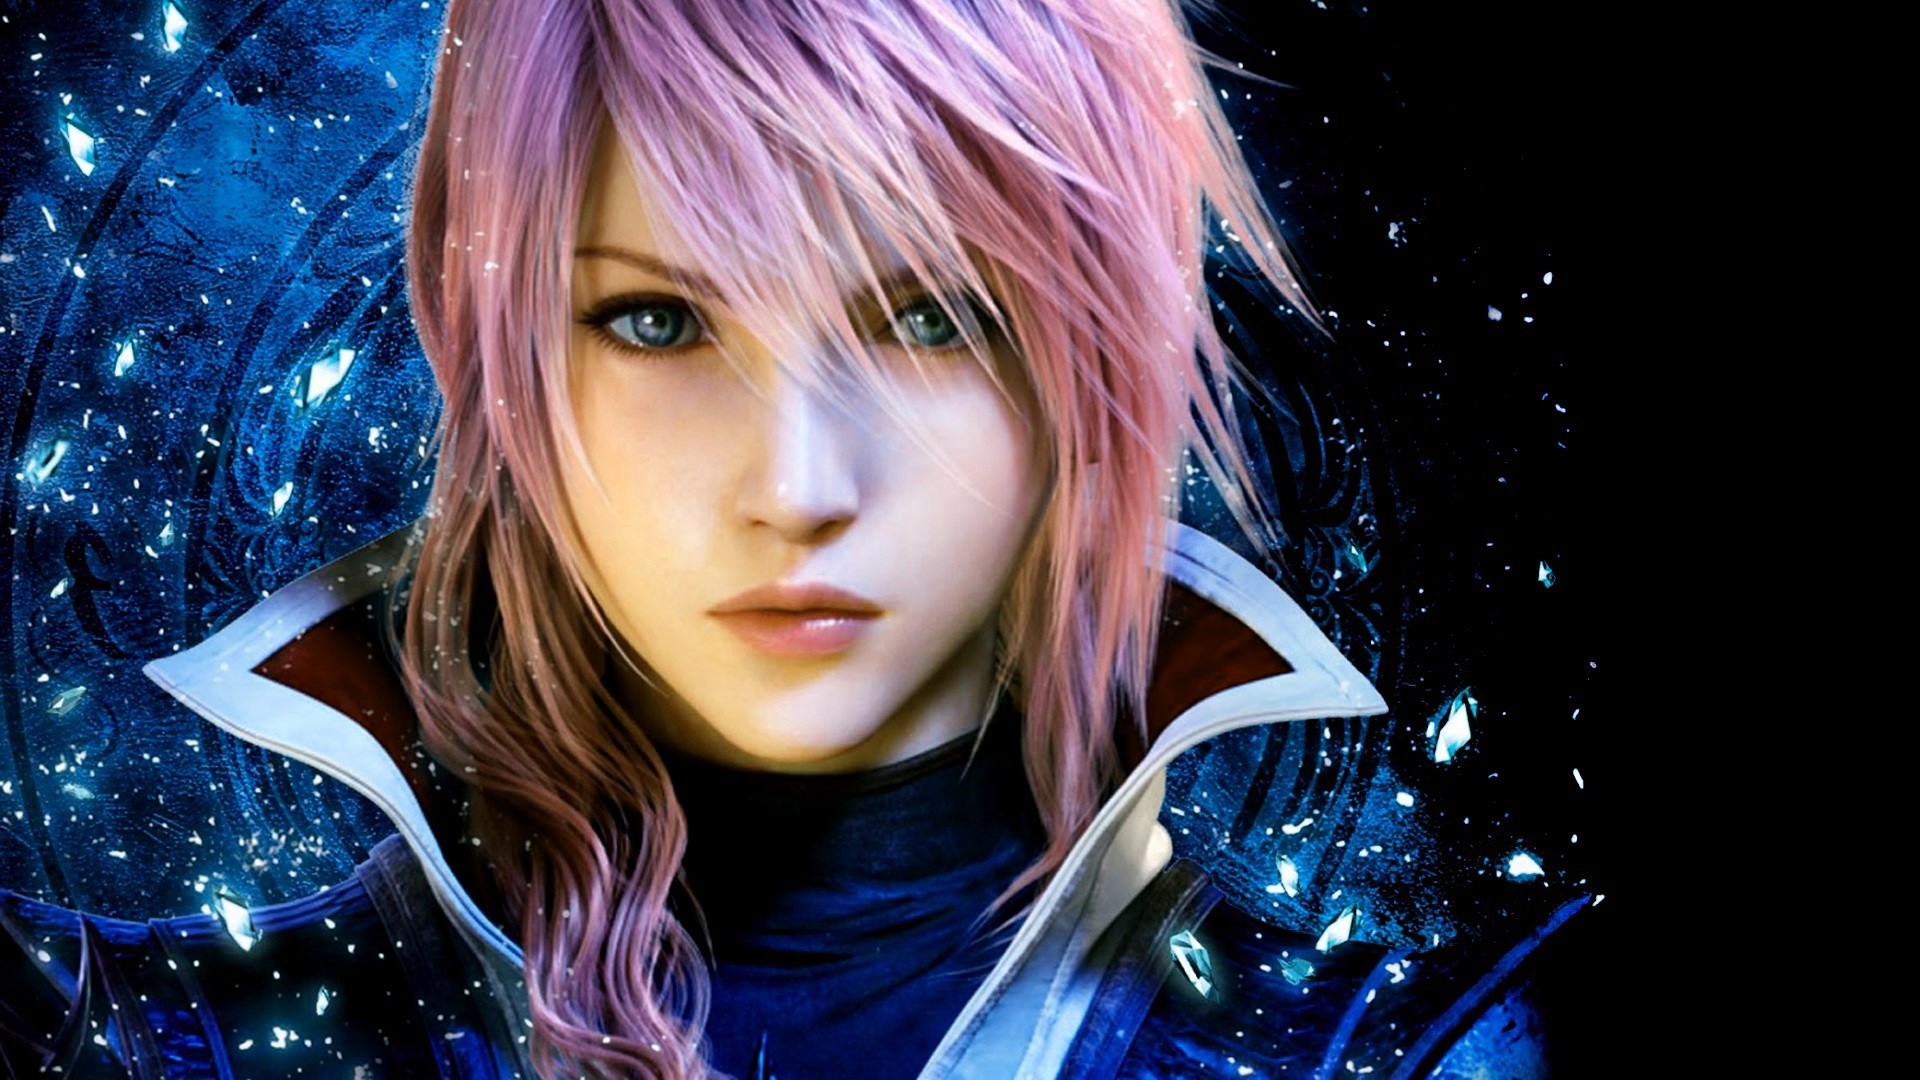 Lightning Returns Final Fantasy XIII Photos,HD Wallpapers,Images